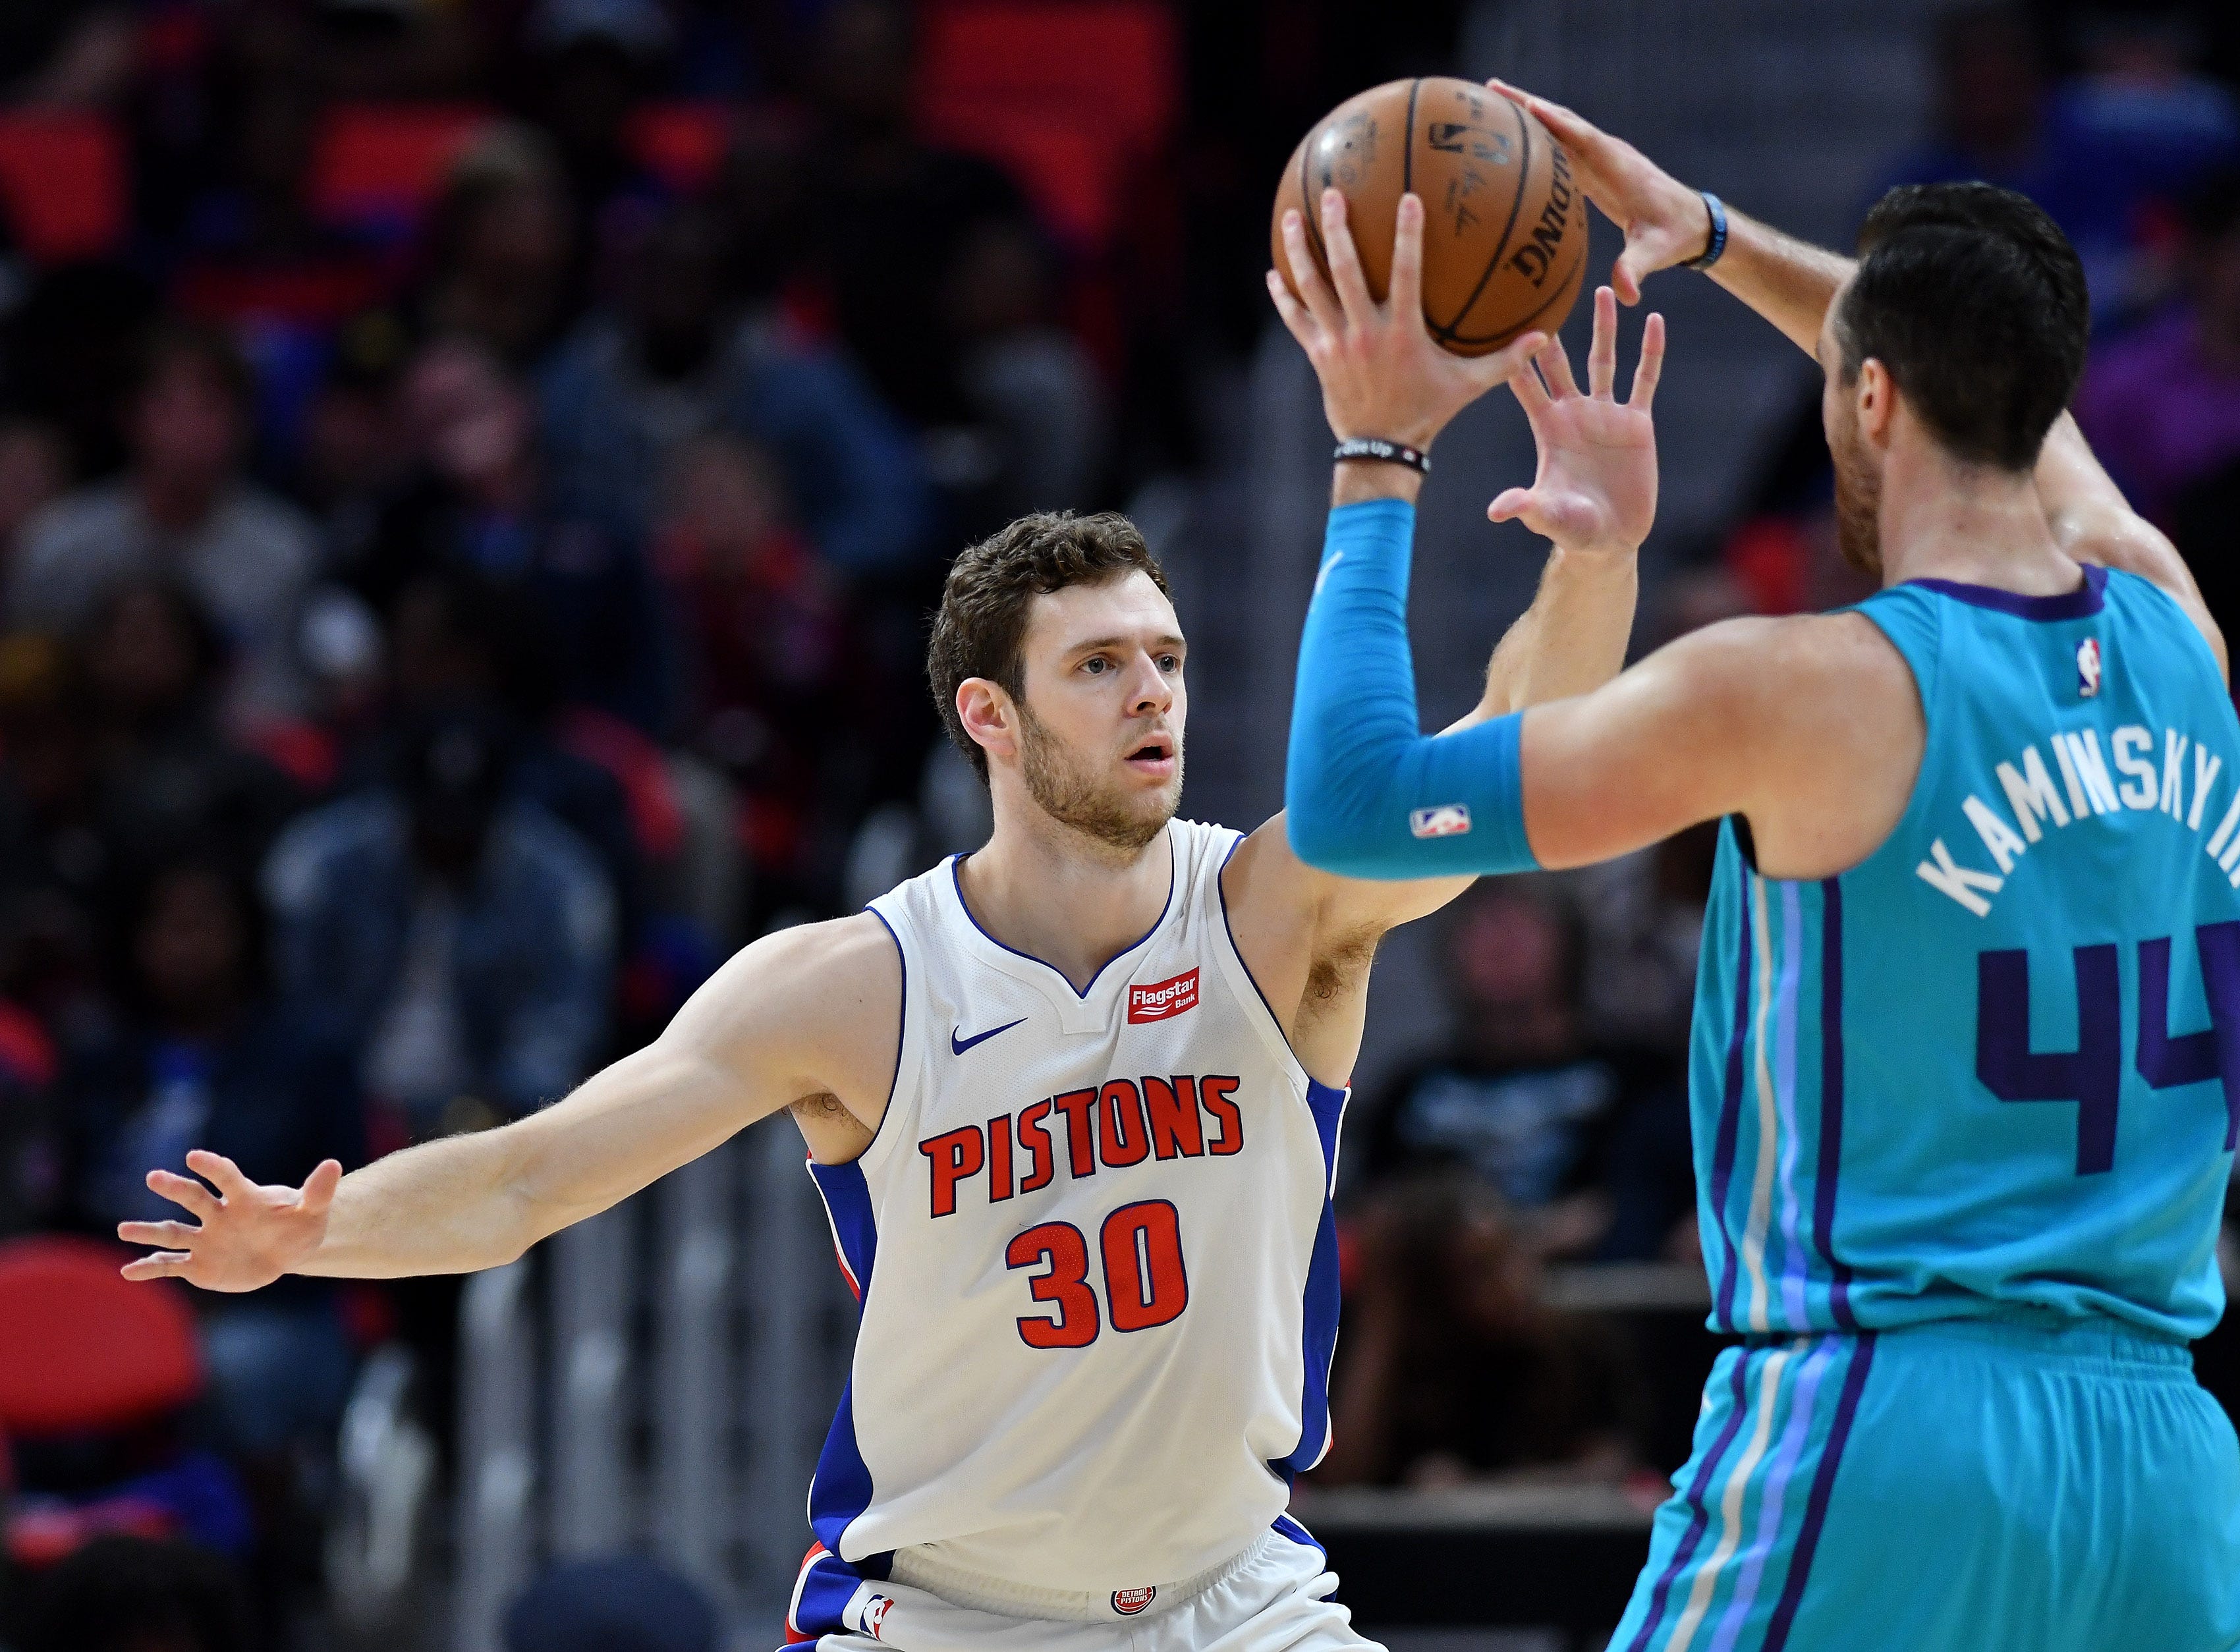 9. Jon Leuer, F/C: Injuries sidelined the versatile big man for all but eight games last season. As a reserve in 2016-17, Leuer had impressive numbers but might best be used as a stretch center or power forward. He could see more time behind Blake Griffin and his 3-point shooting will be a welcome addition to a reserve group that struggled to generate offense.